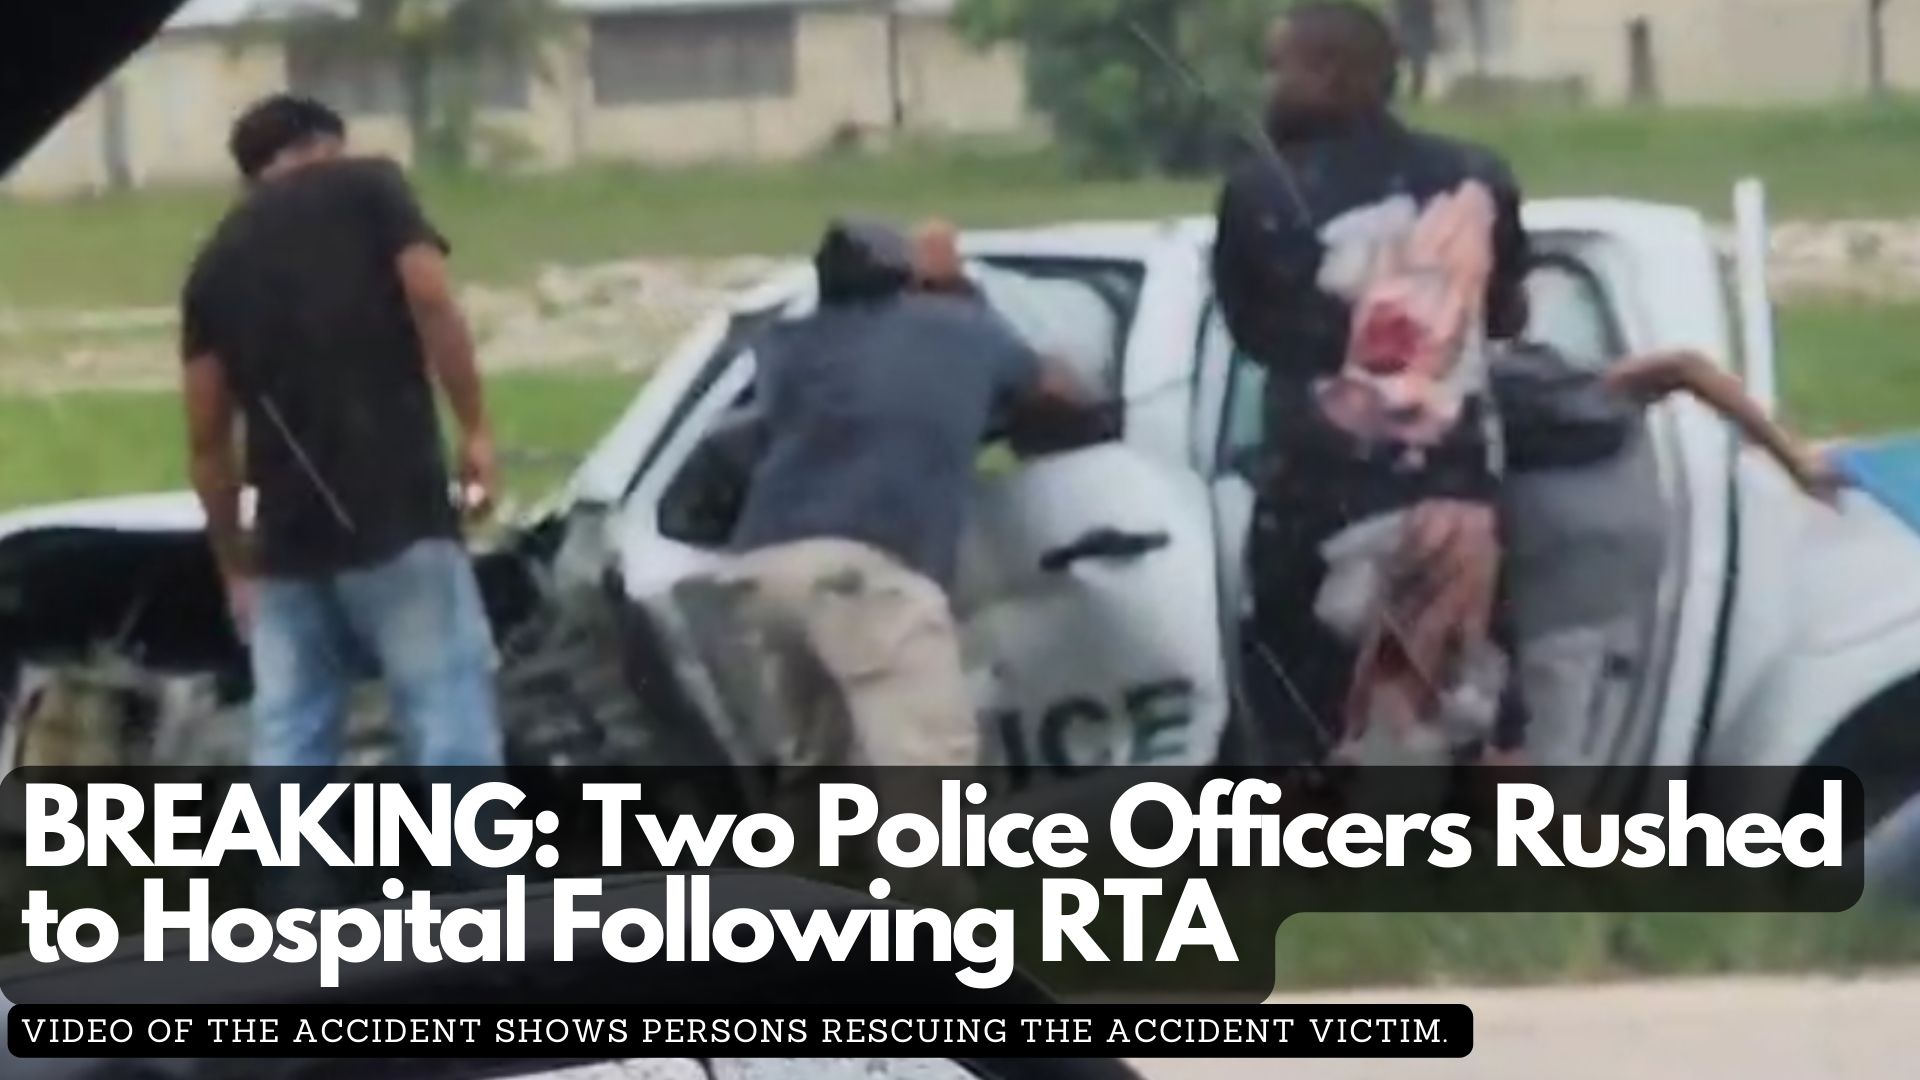 BREAKING: Two Police Officers Rushed to Hospital Following RTA